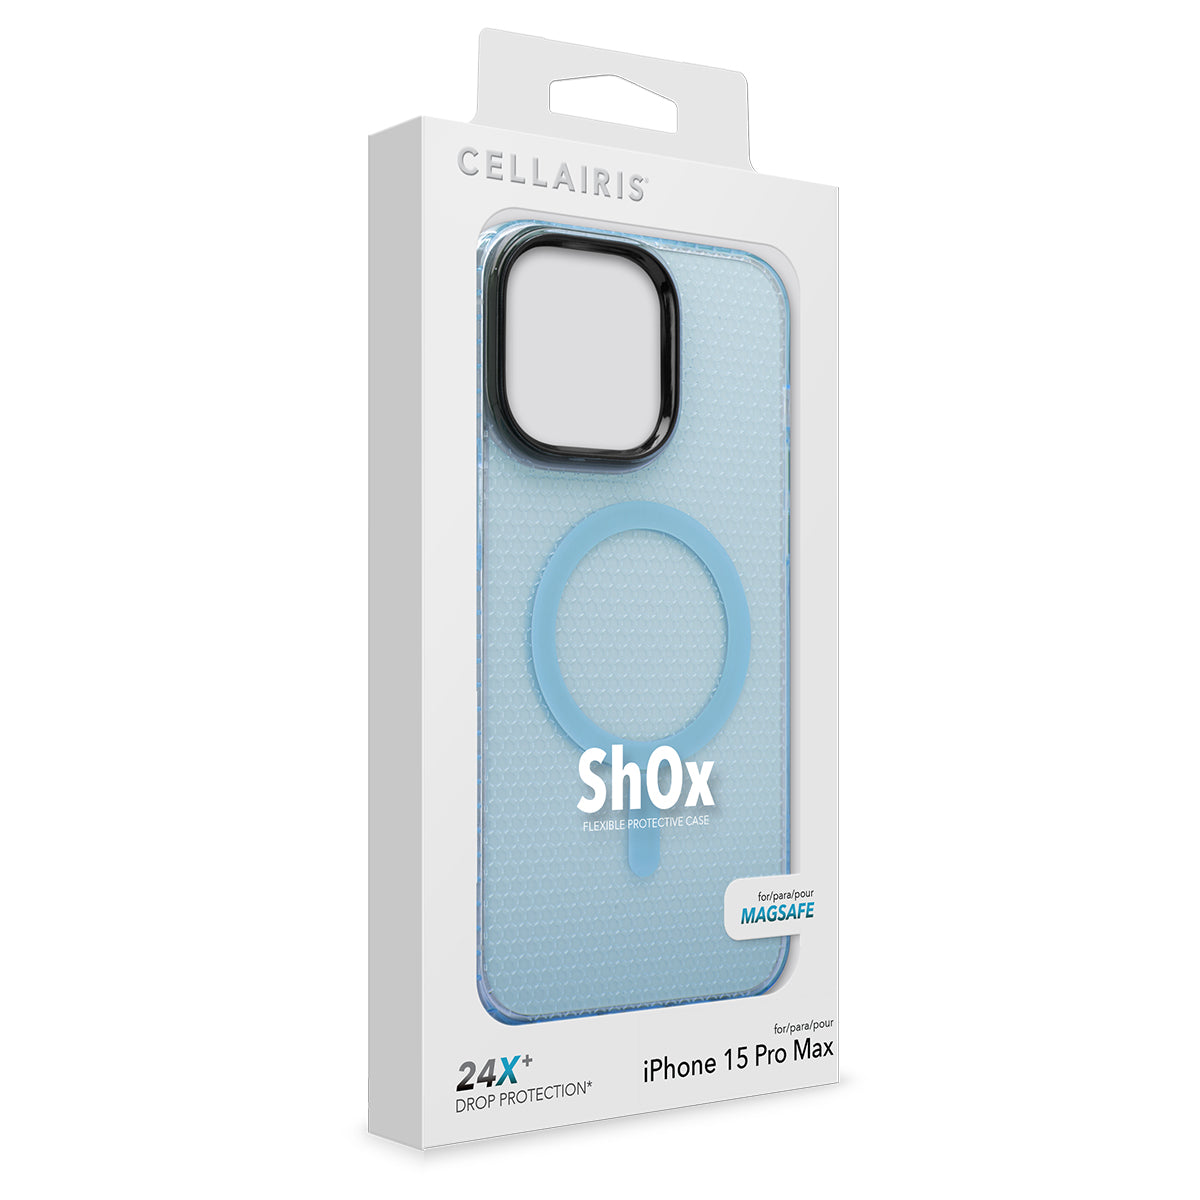 ShOx - iPhone 15 Pro Max Blue w/ MagSafe Cases